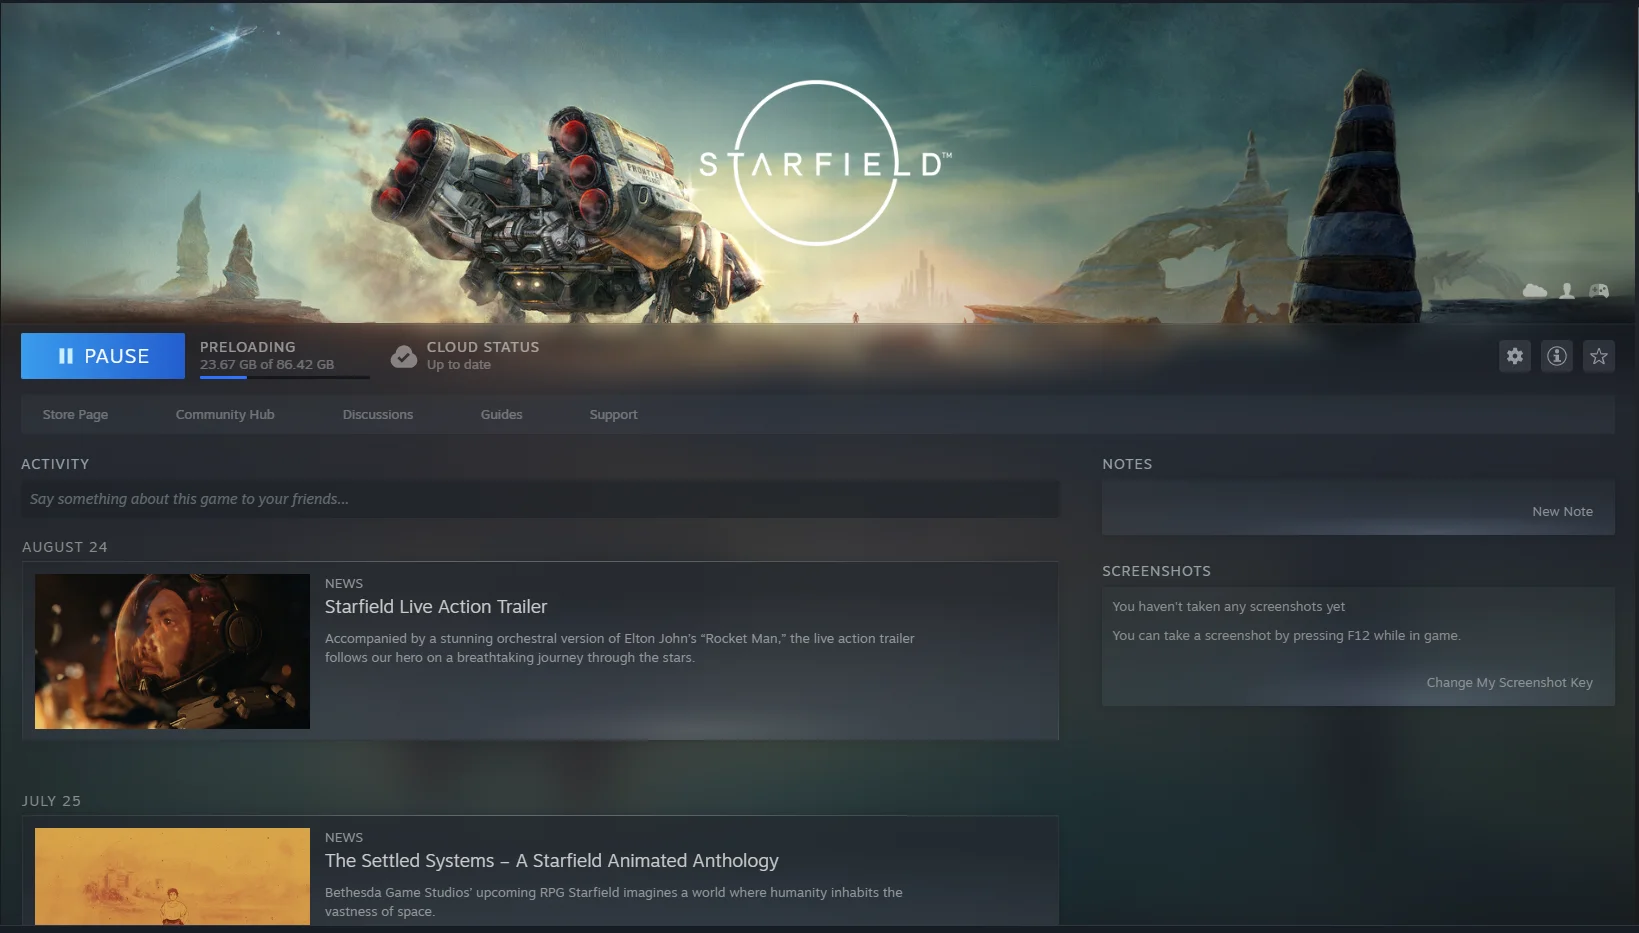 How To Download Subscriptions On Steam Without Game - Colaboratory